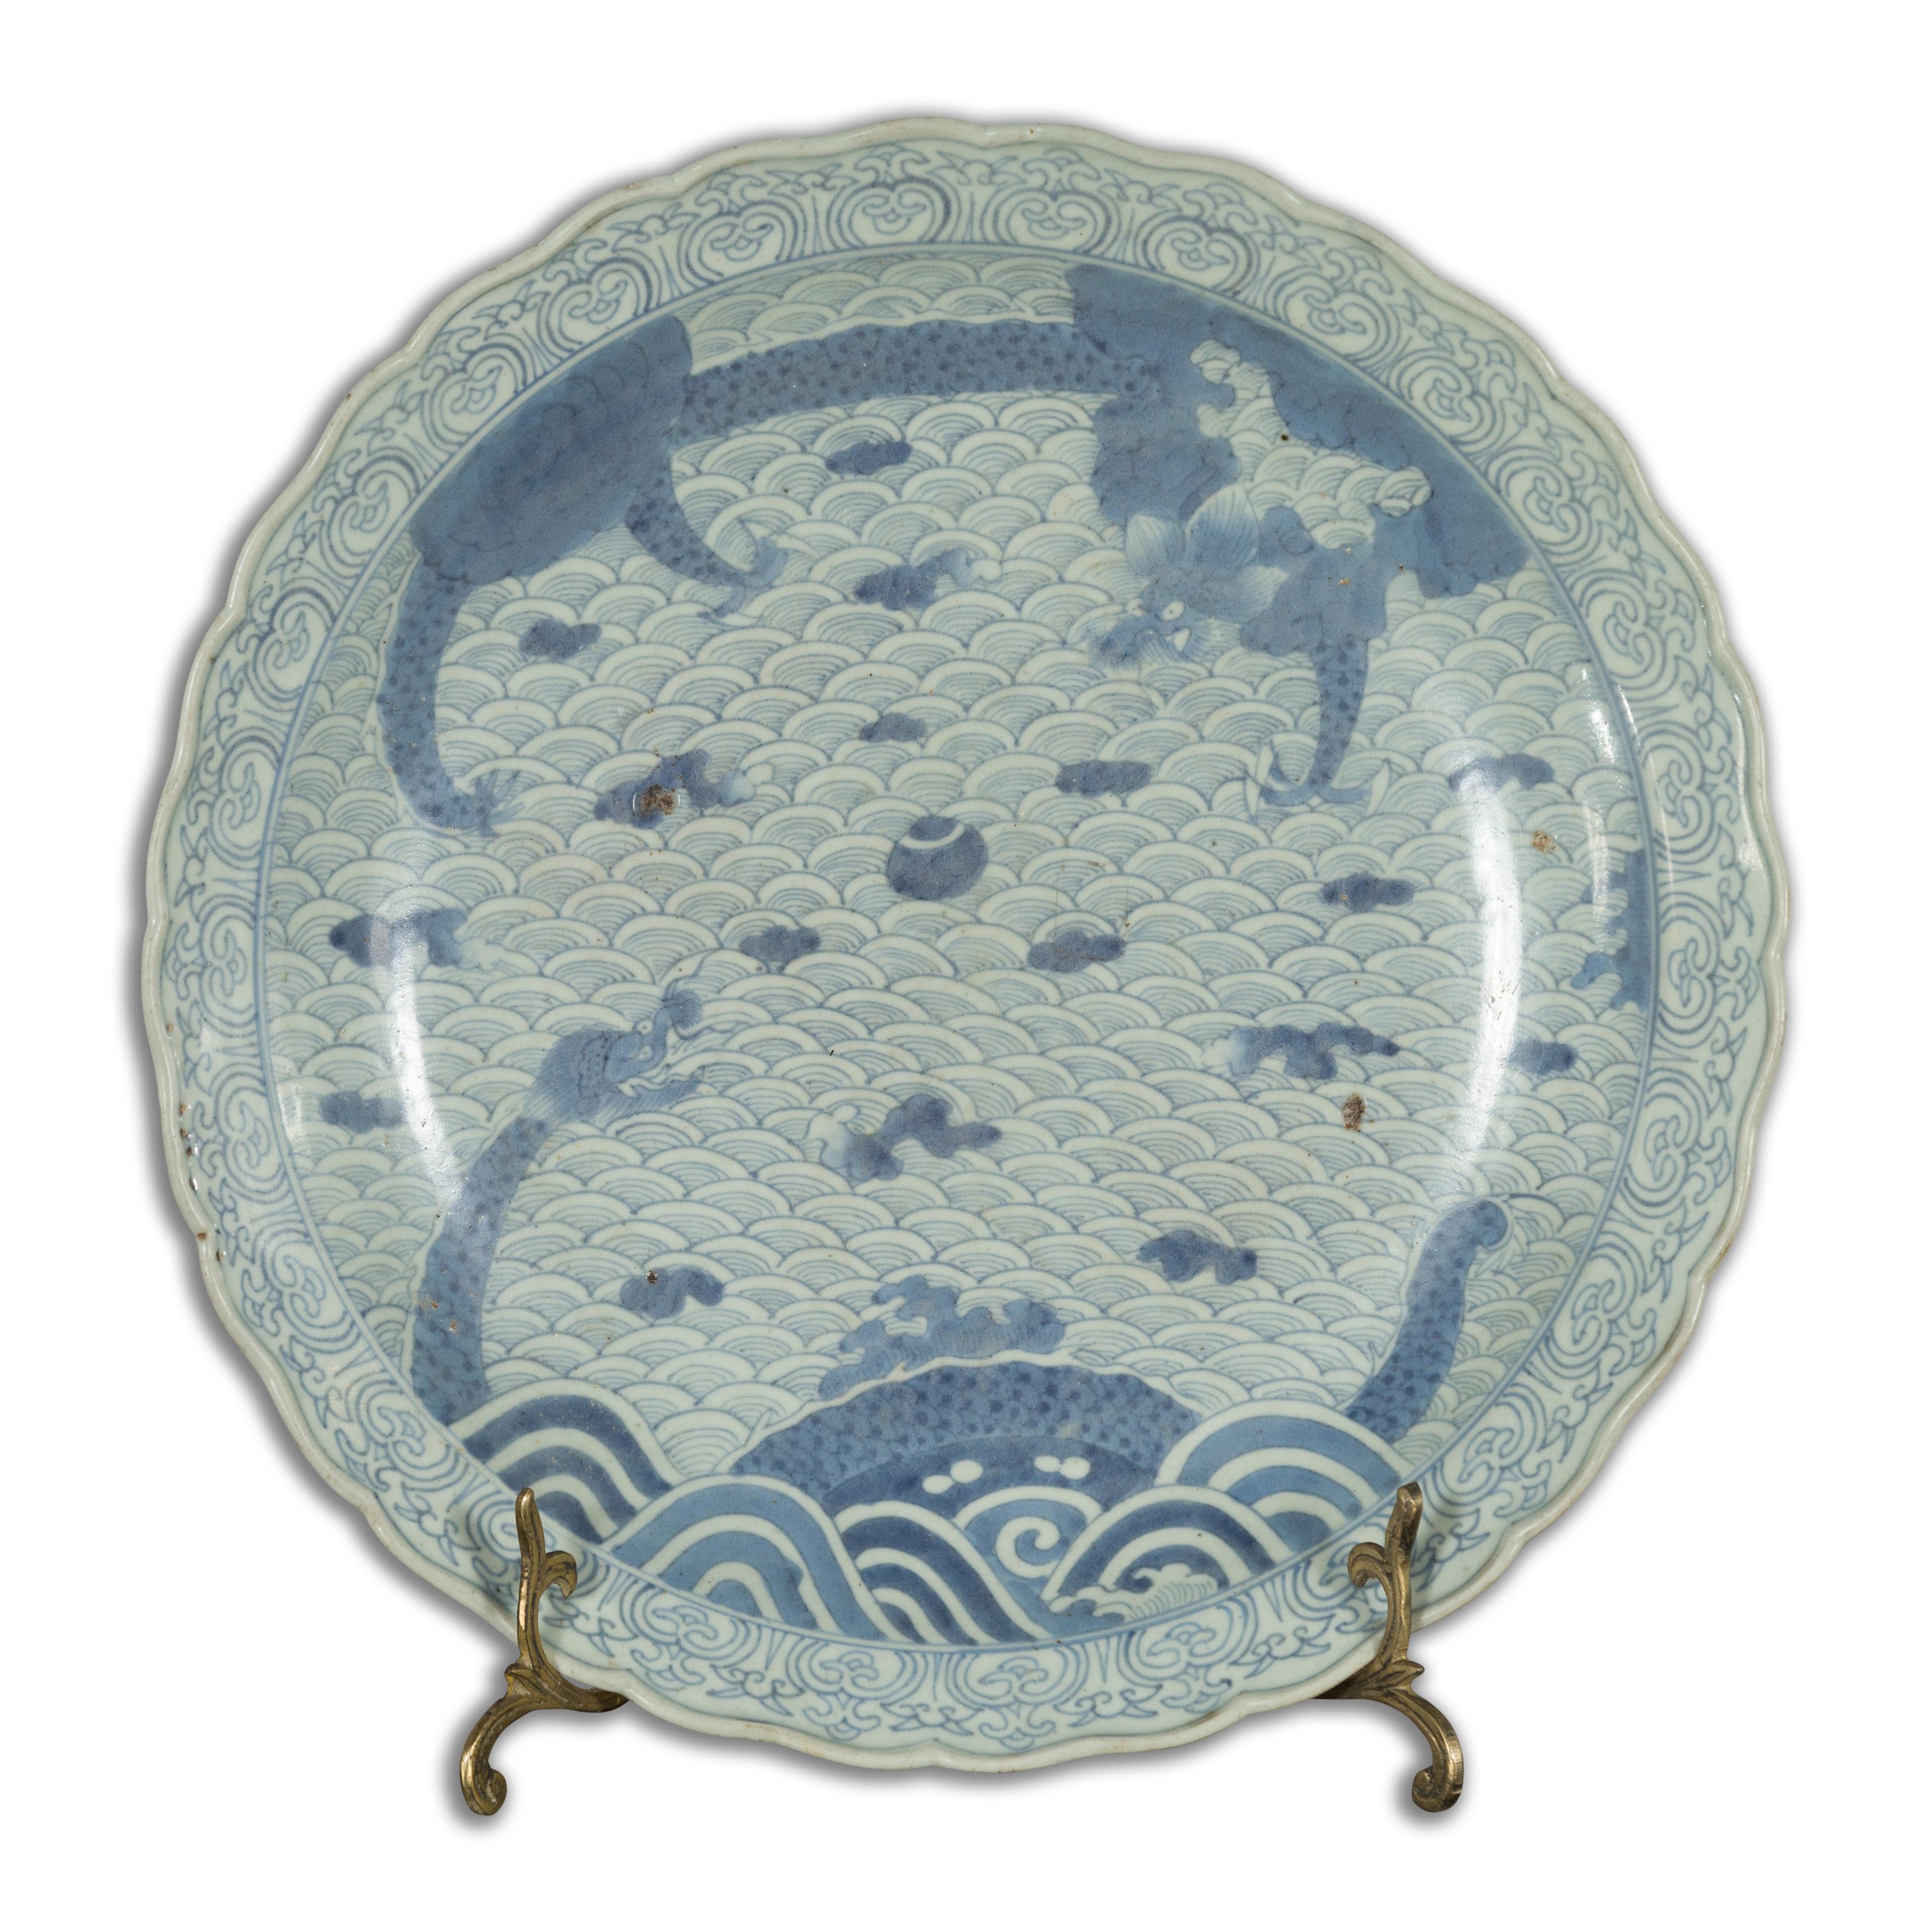 Japanese 19th Century Porcelain Plate with Blue and White Dragon in Clouds Décor 13